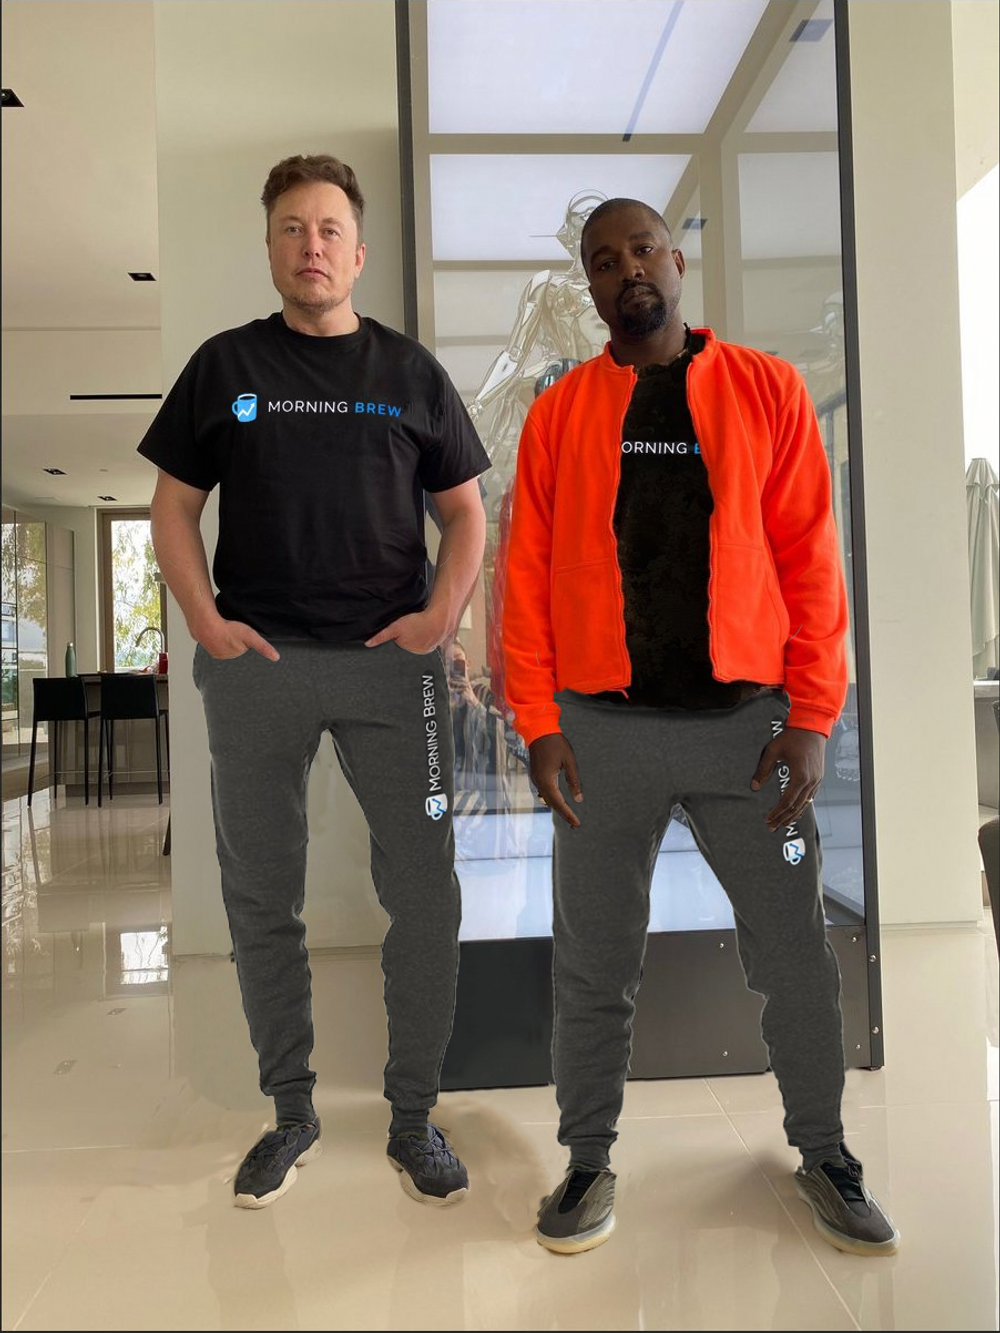 Kanye and Musk in Brew clothing